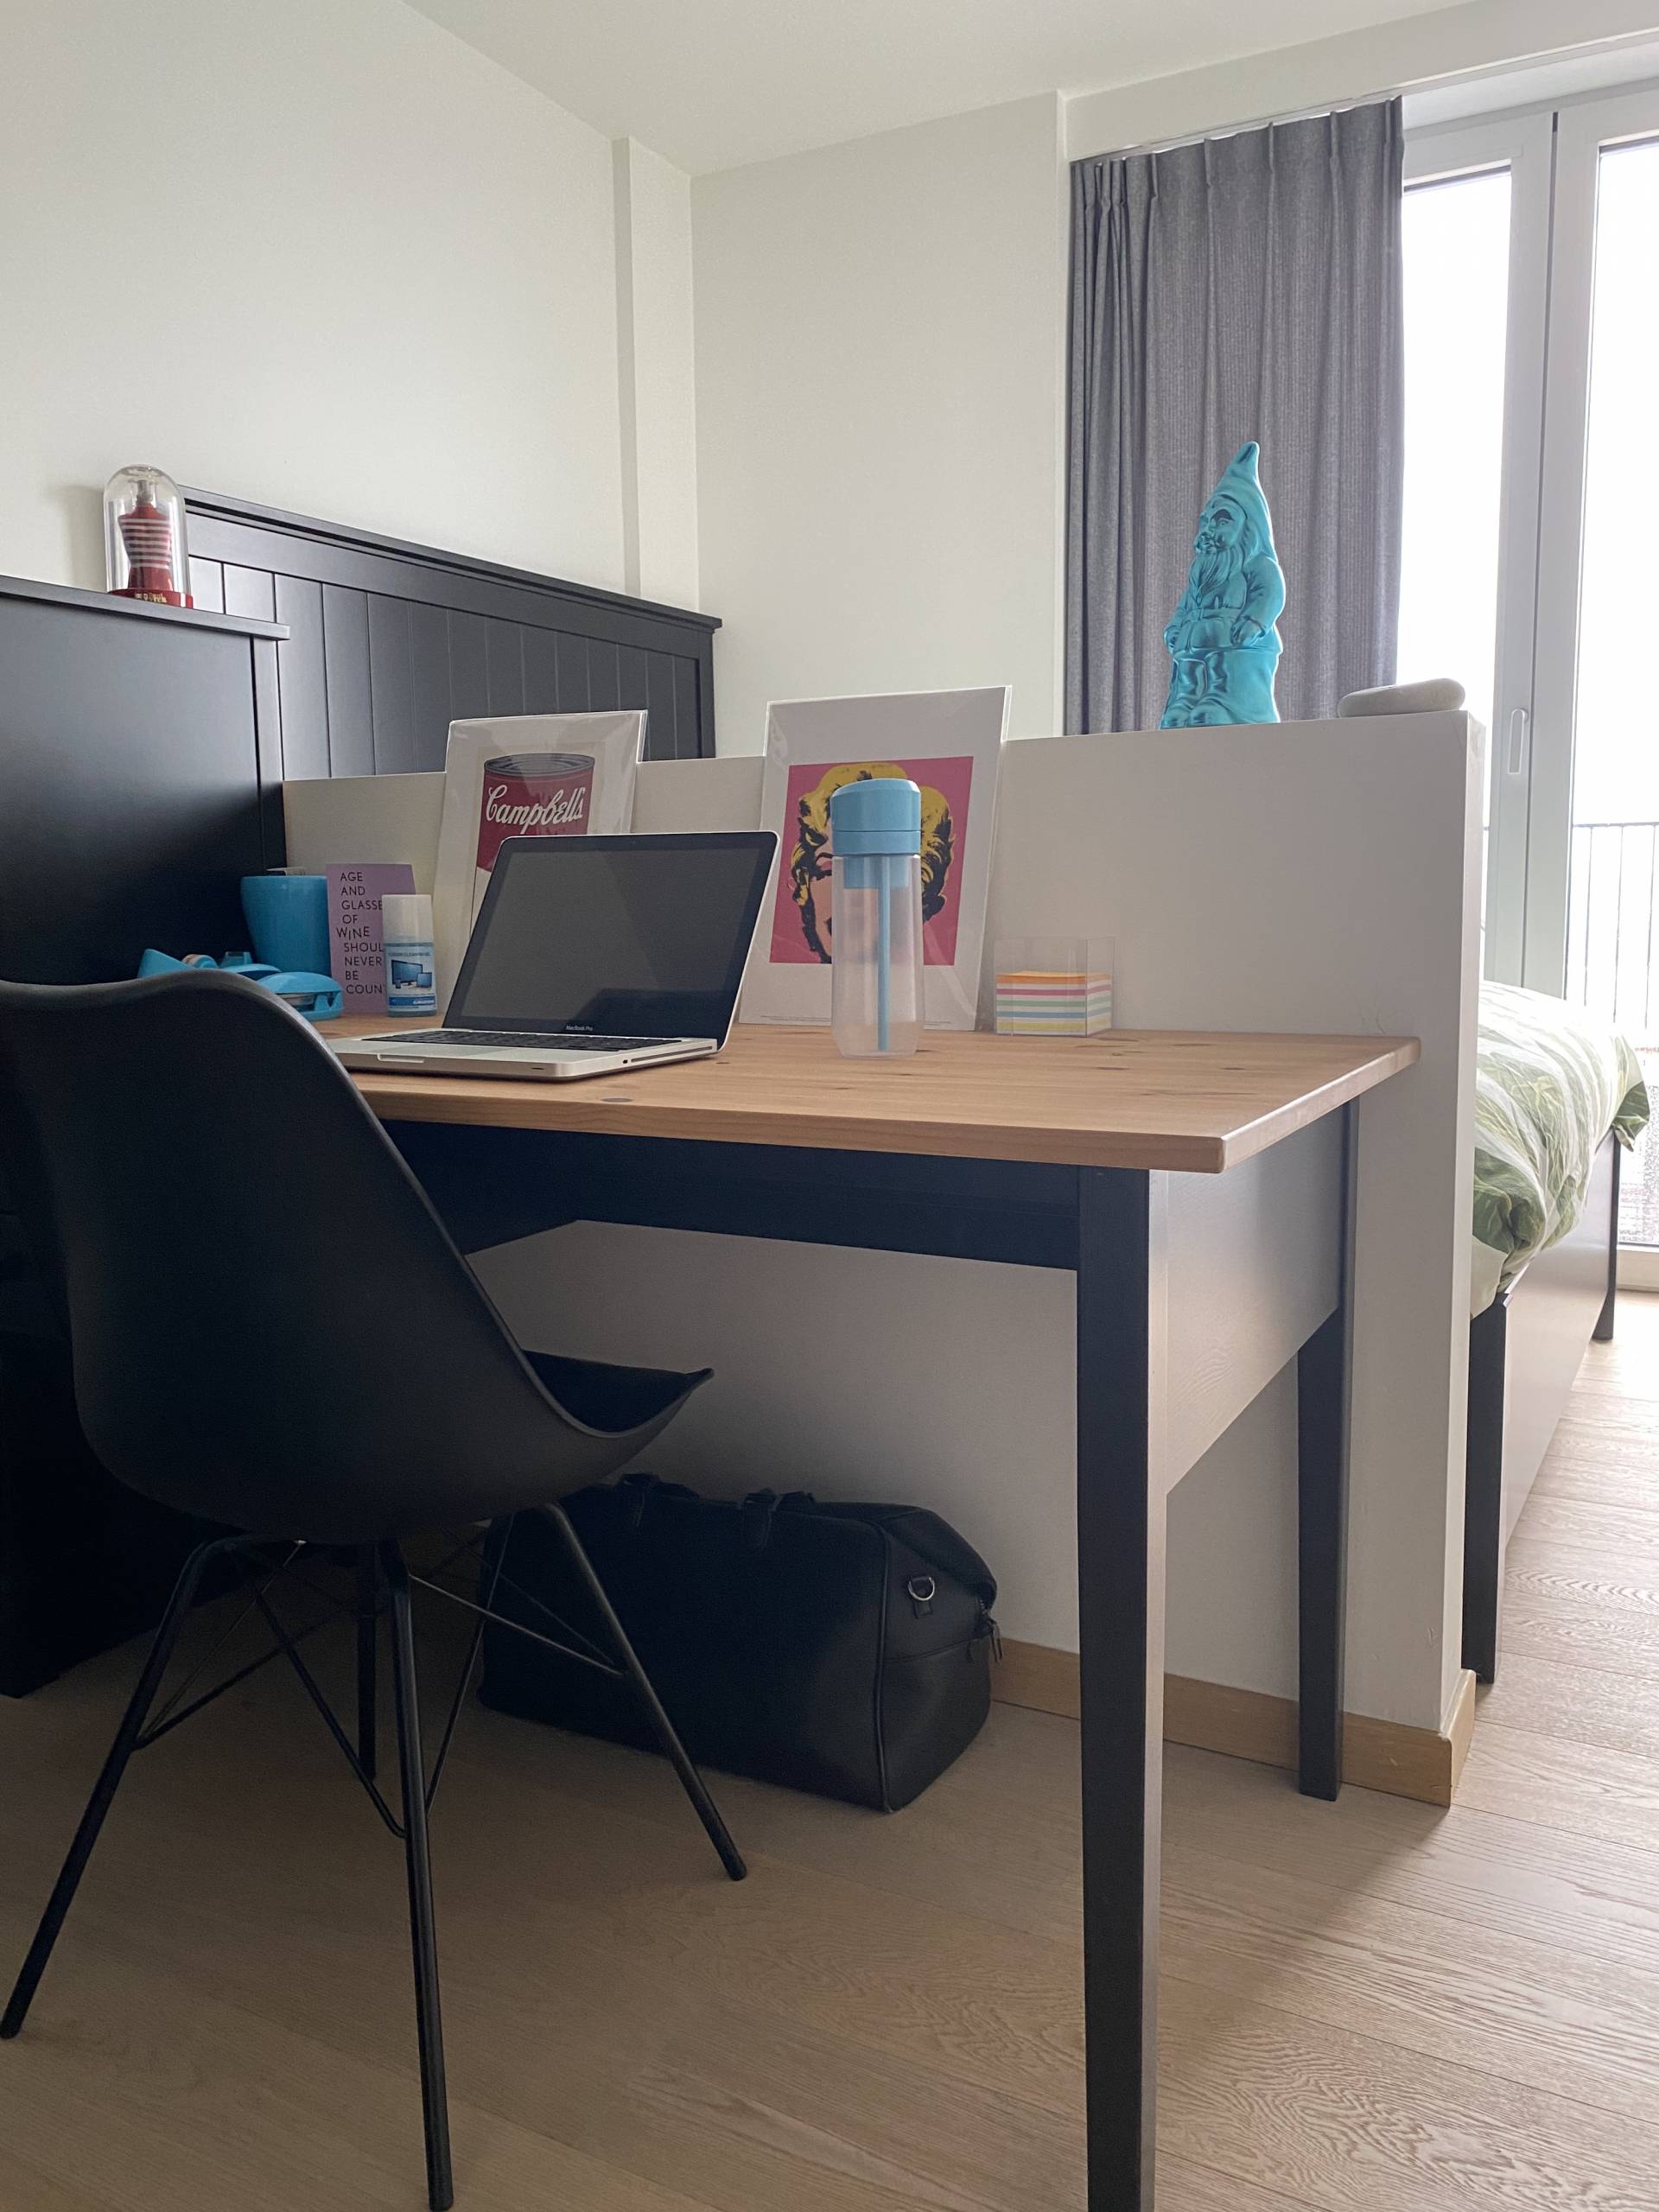 Dok - Furnished home for rent in Ghent